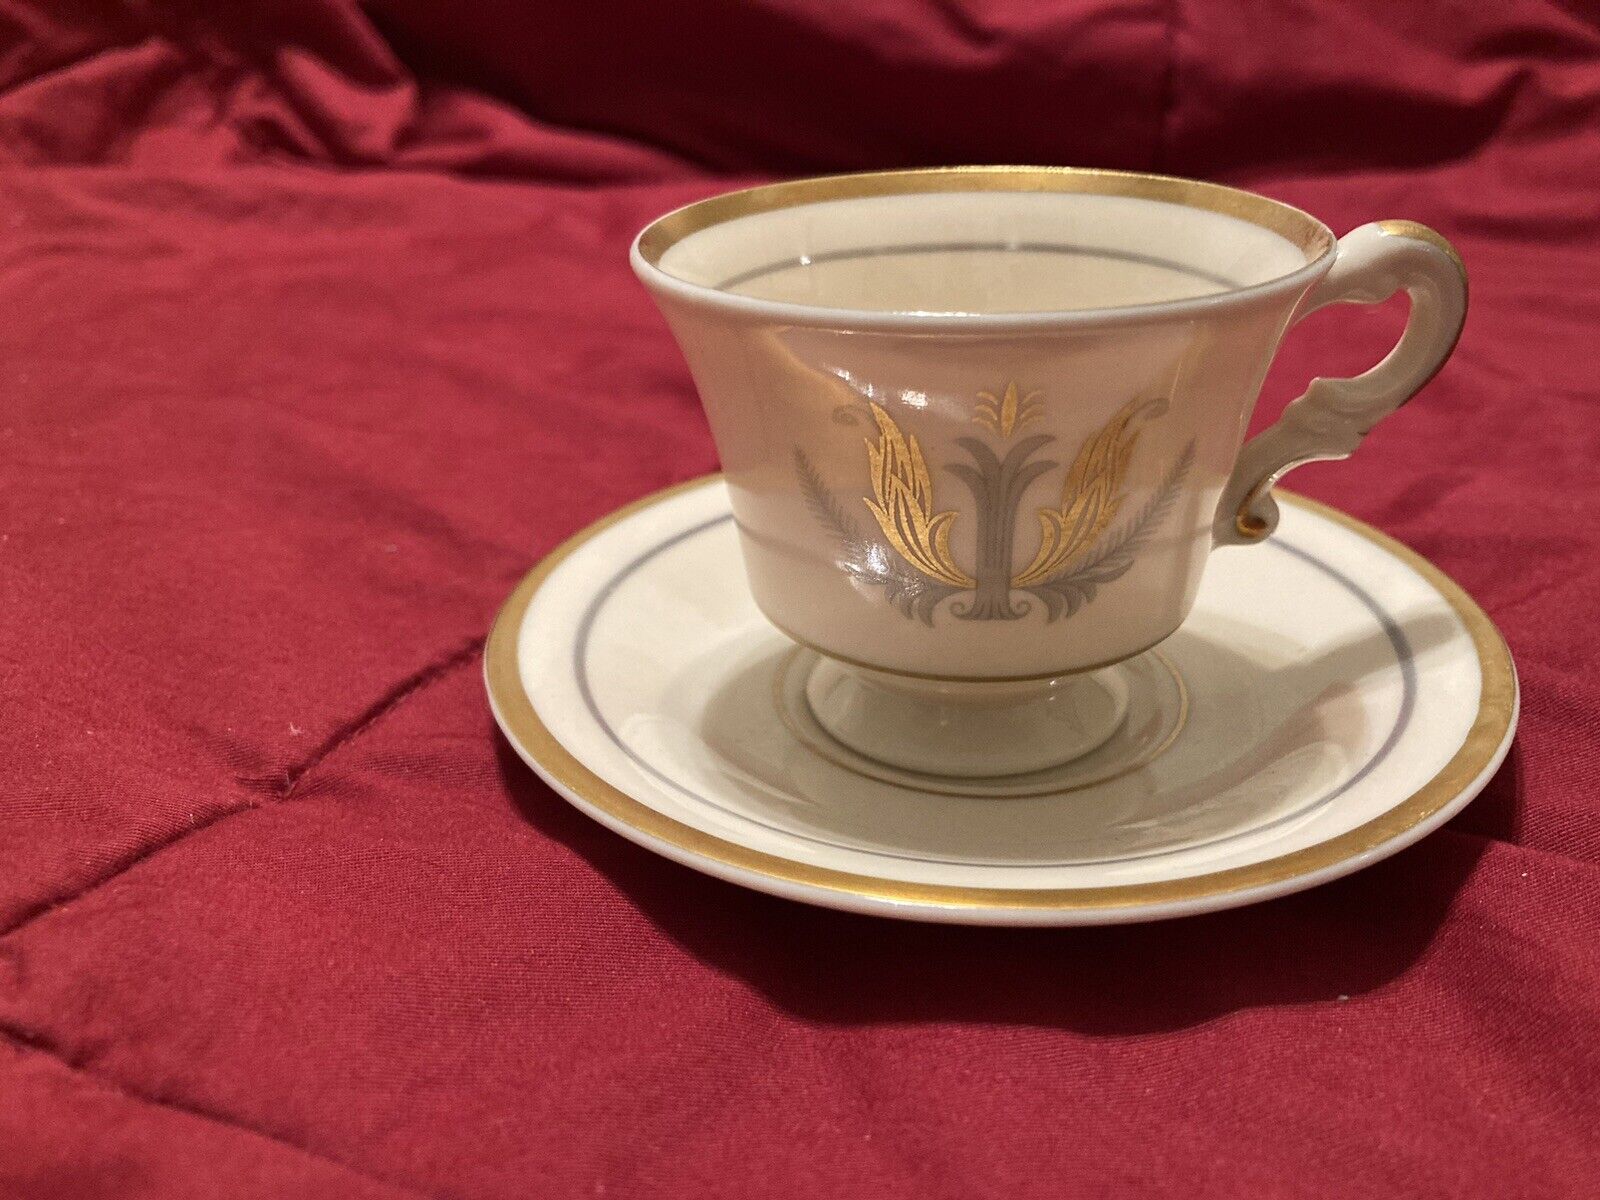 VINTAGE SYRACUSE CHINA MADE FOR GOVERNOR CLINTON TEA CUP AND SAUCER..